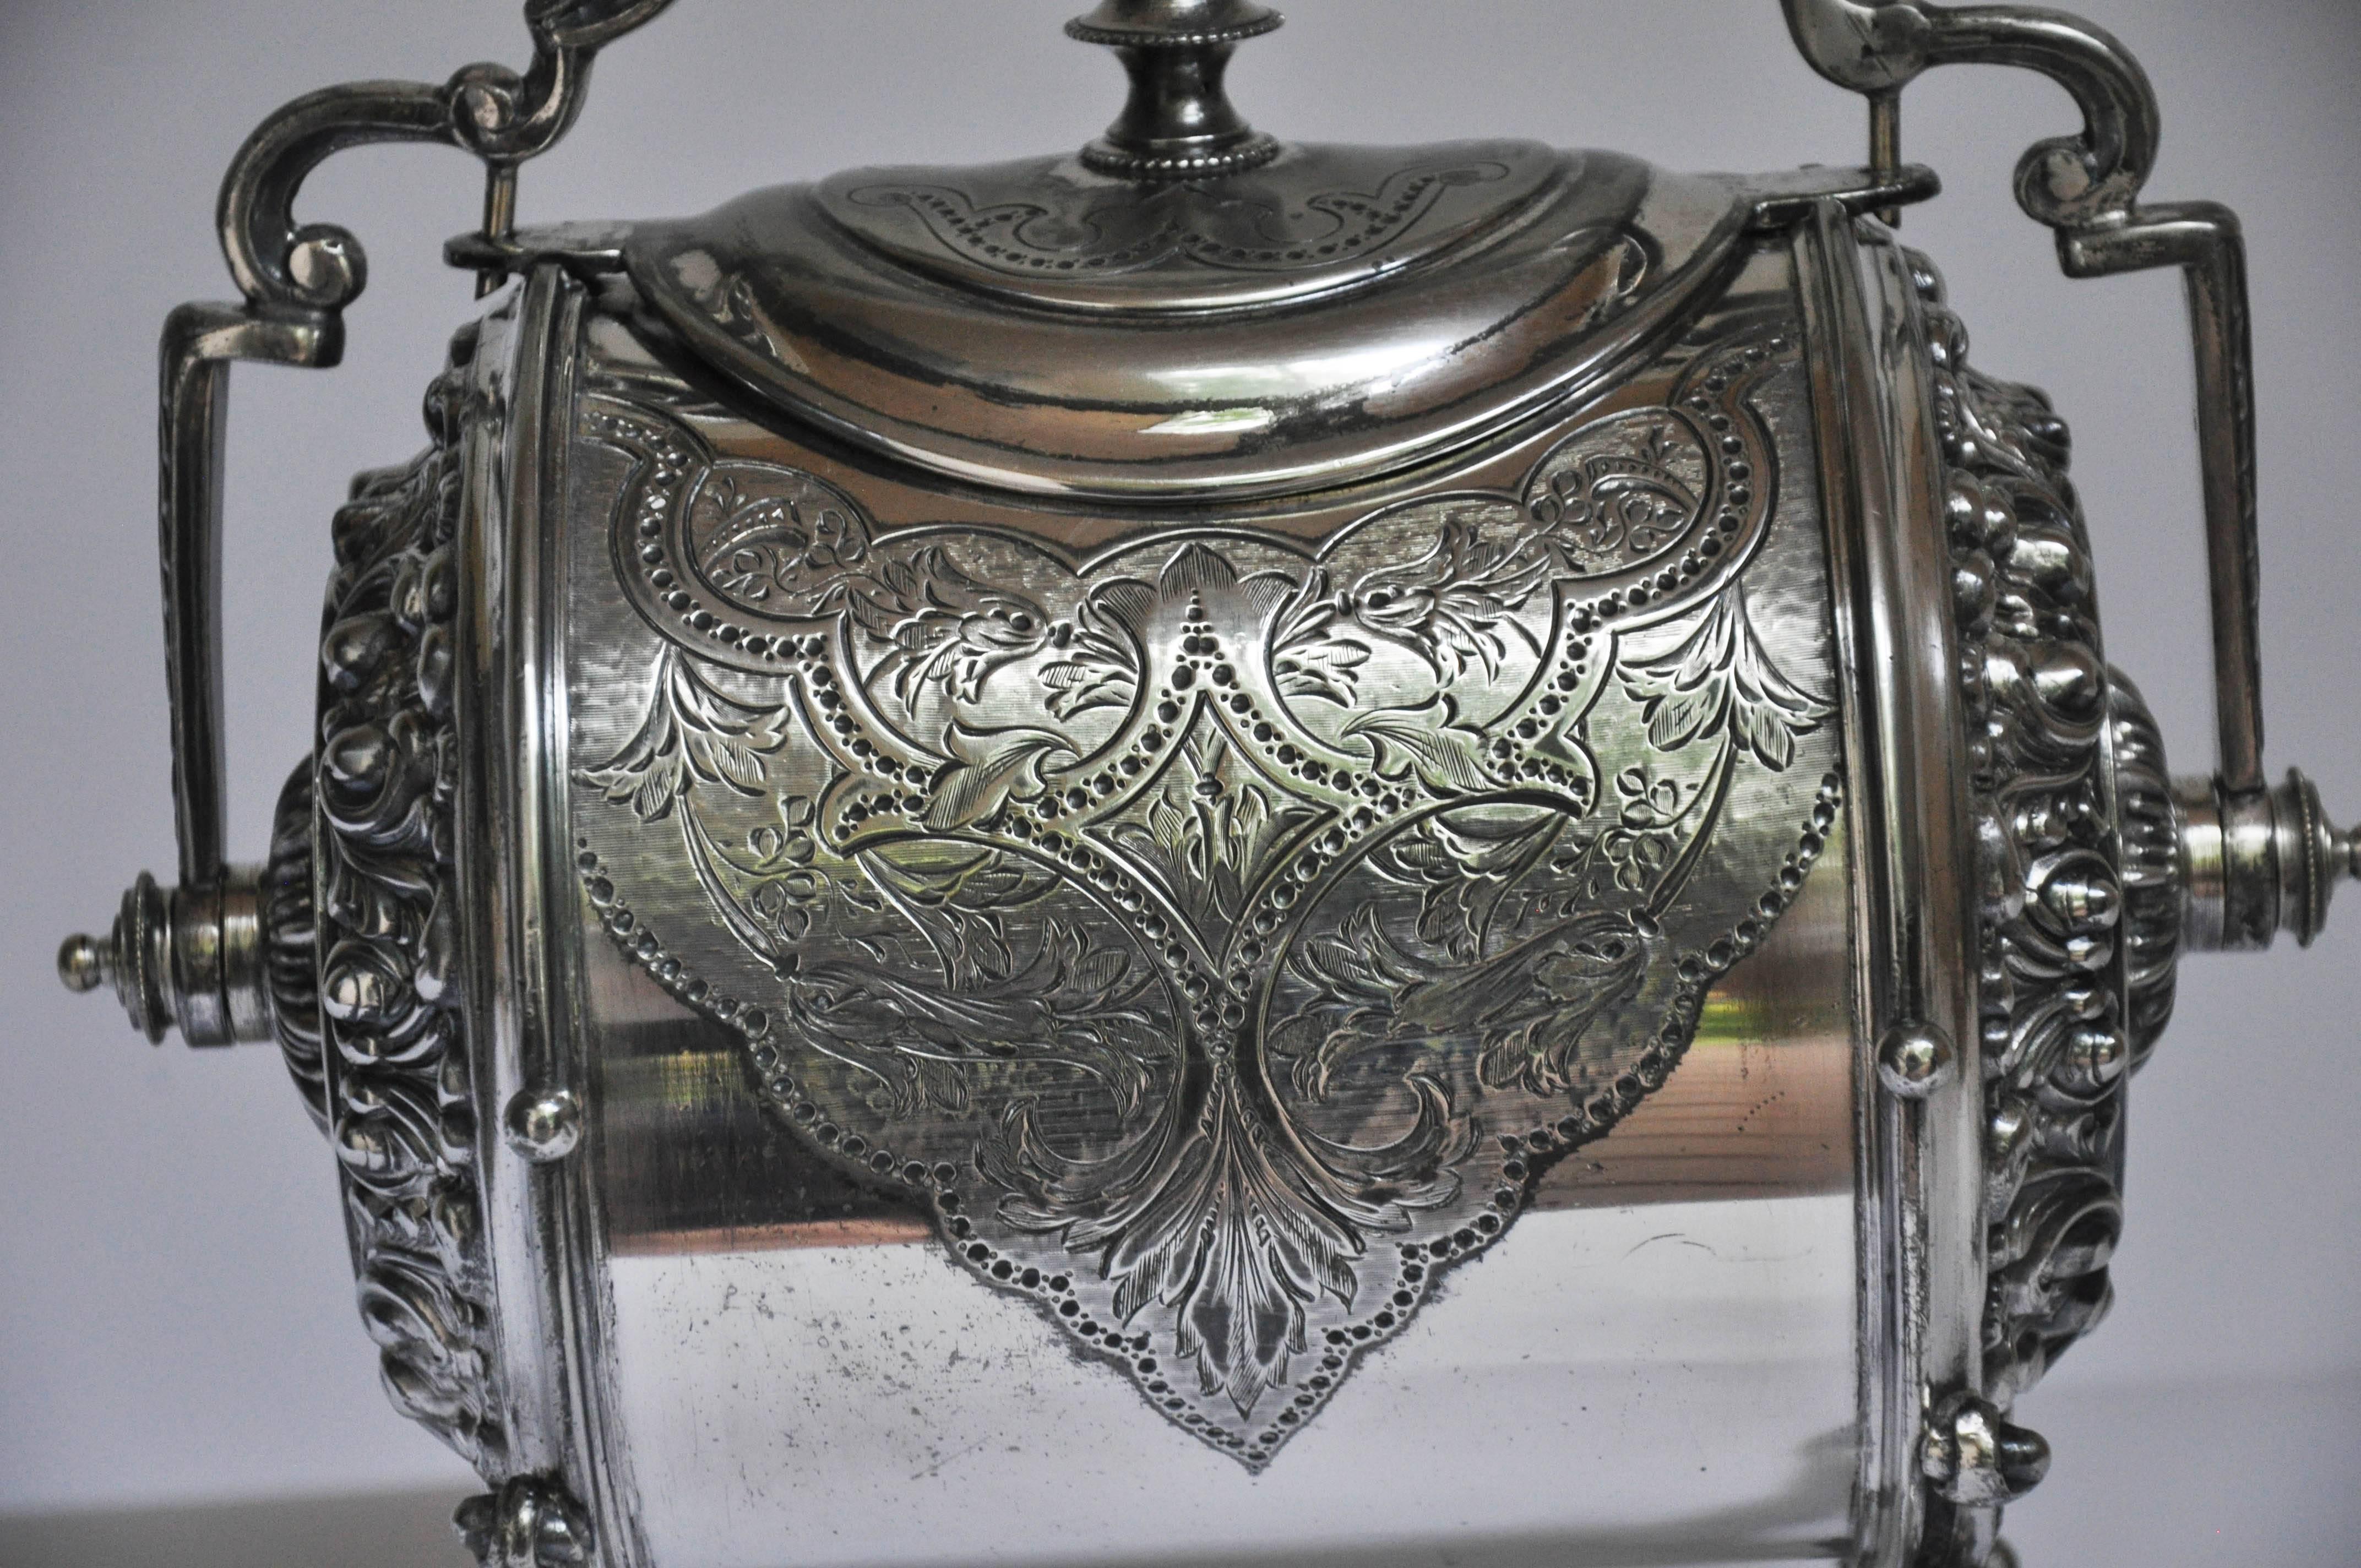 Charming silver bun warmer, every aspect of this superbly engraved silver bun warmer illustrates why it always held a prominent place on the dining table. Each front side of the barrel is heavily engraved with a shield that encompasses an intricate